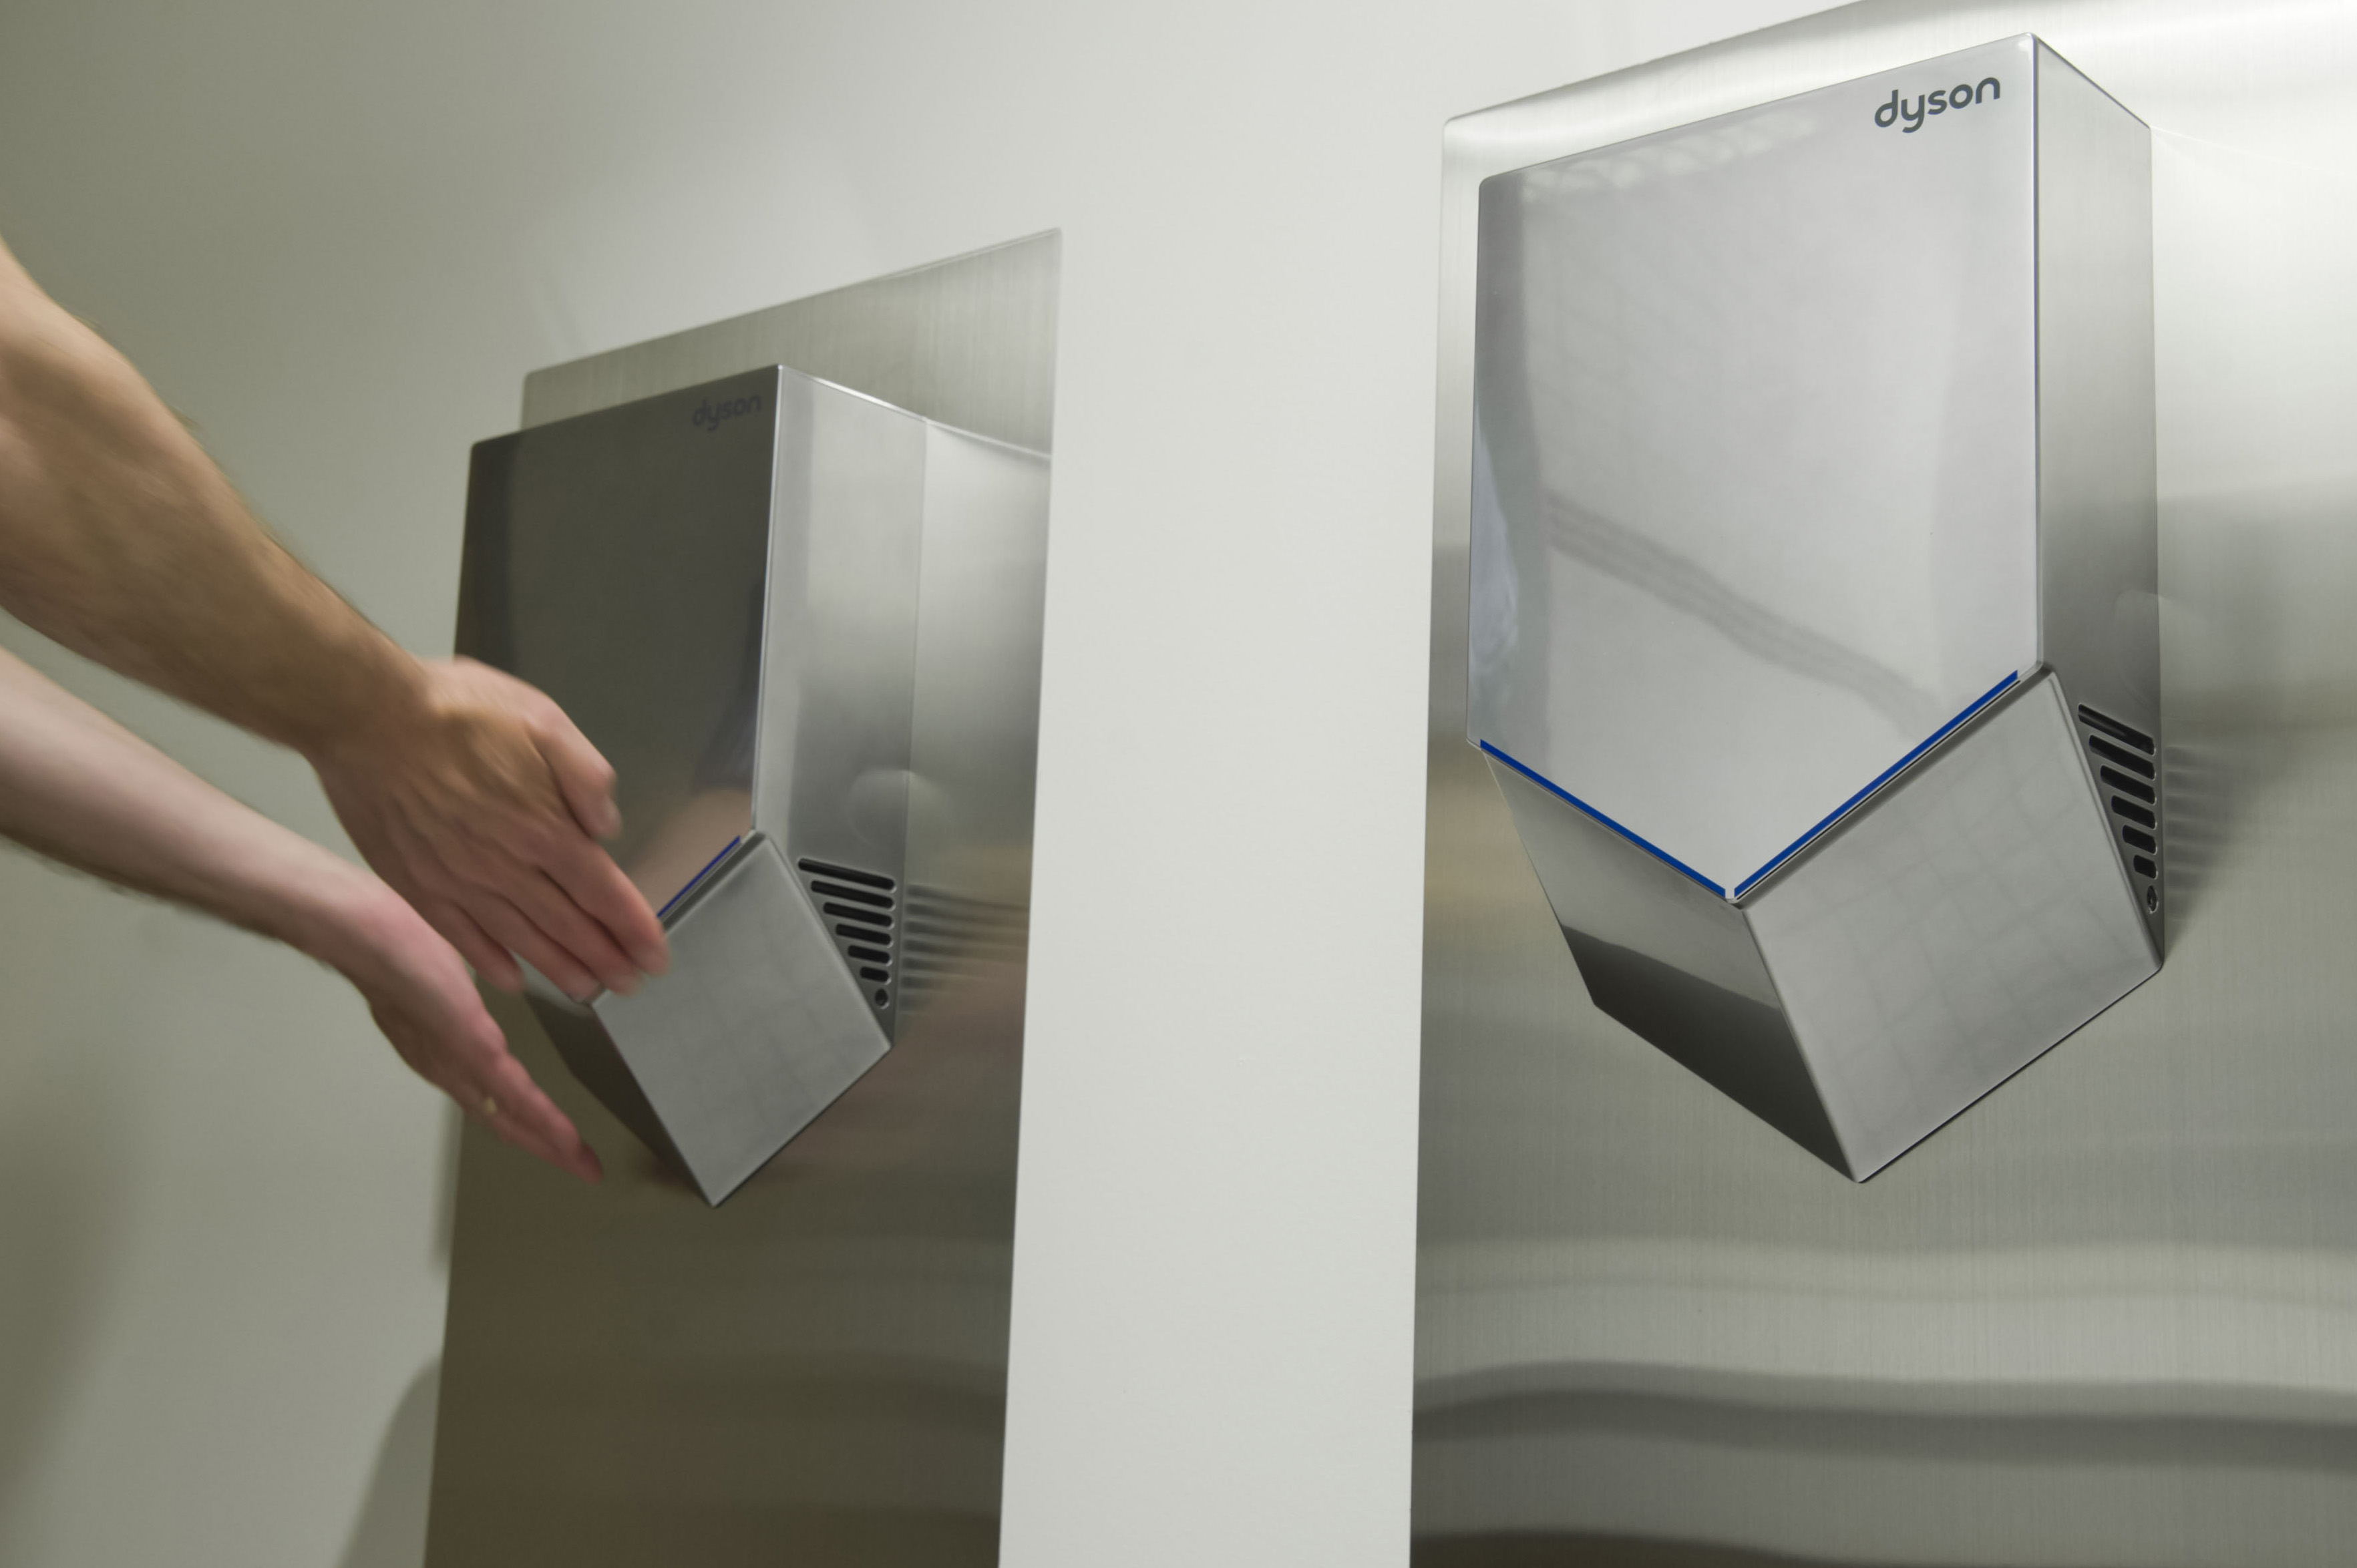 V shaped hand dryer from dyson